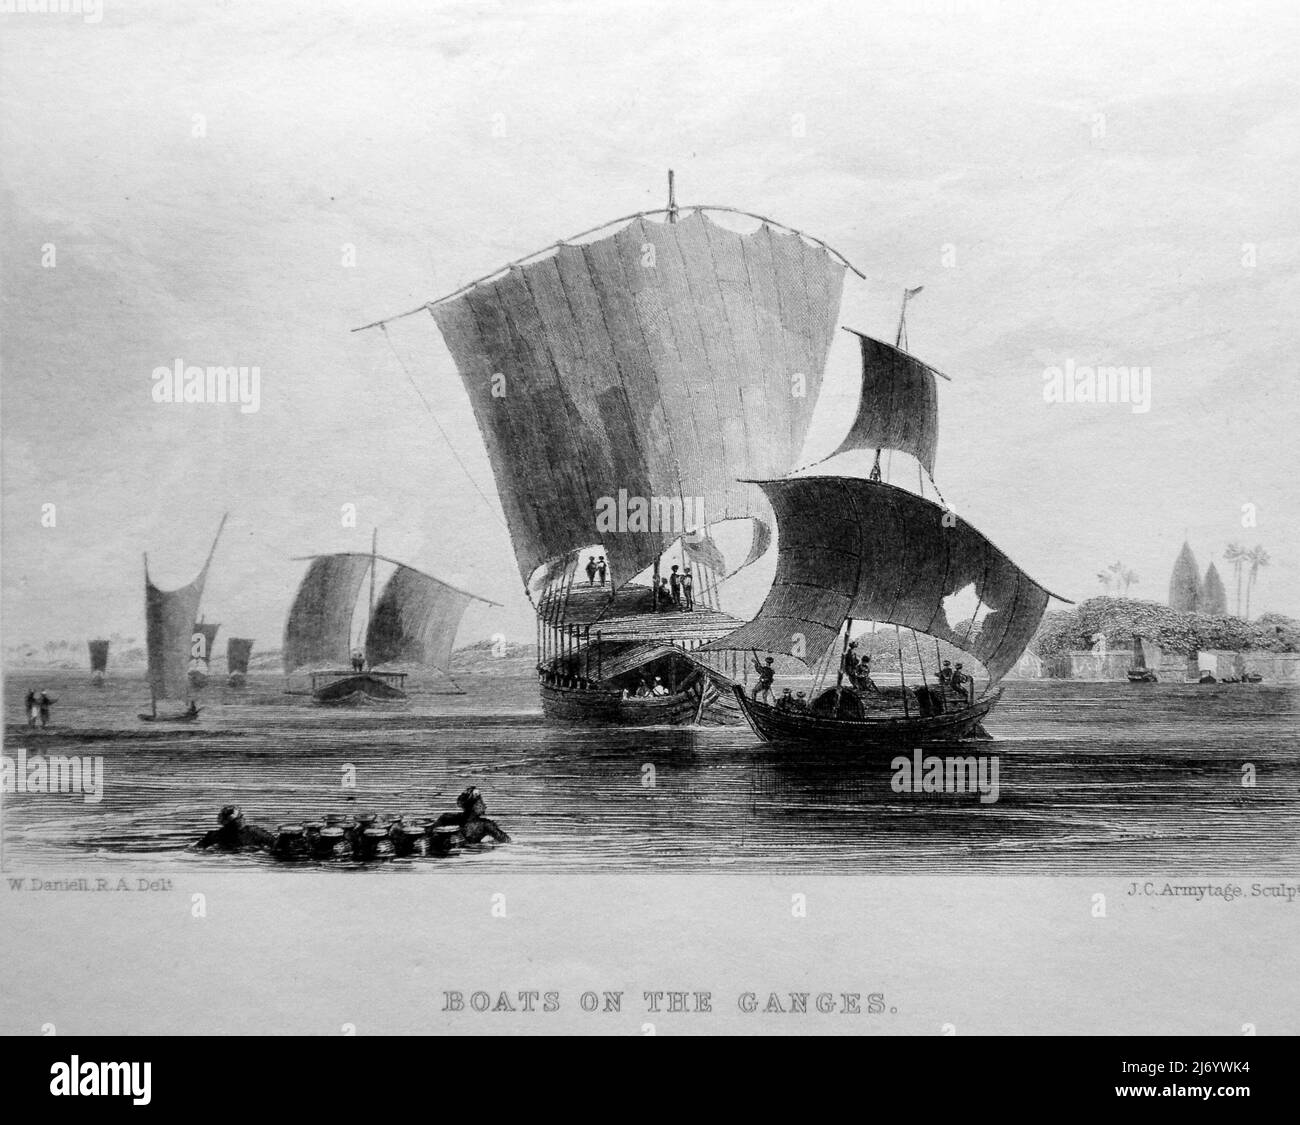 Illustration von 'Boats on the Ganges' aus dem Buch: 'The history of India and of the British Empire in the East' von Nolan, E.H., Published by Virtue & Co. Ltd, London, 1861. Stockfoto